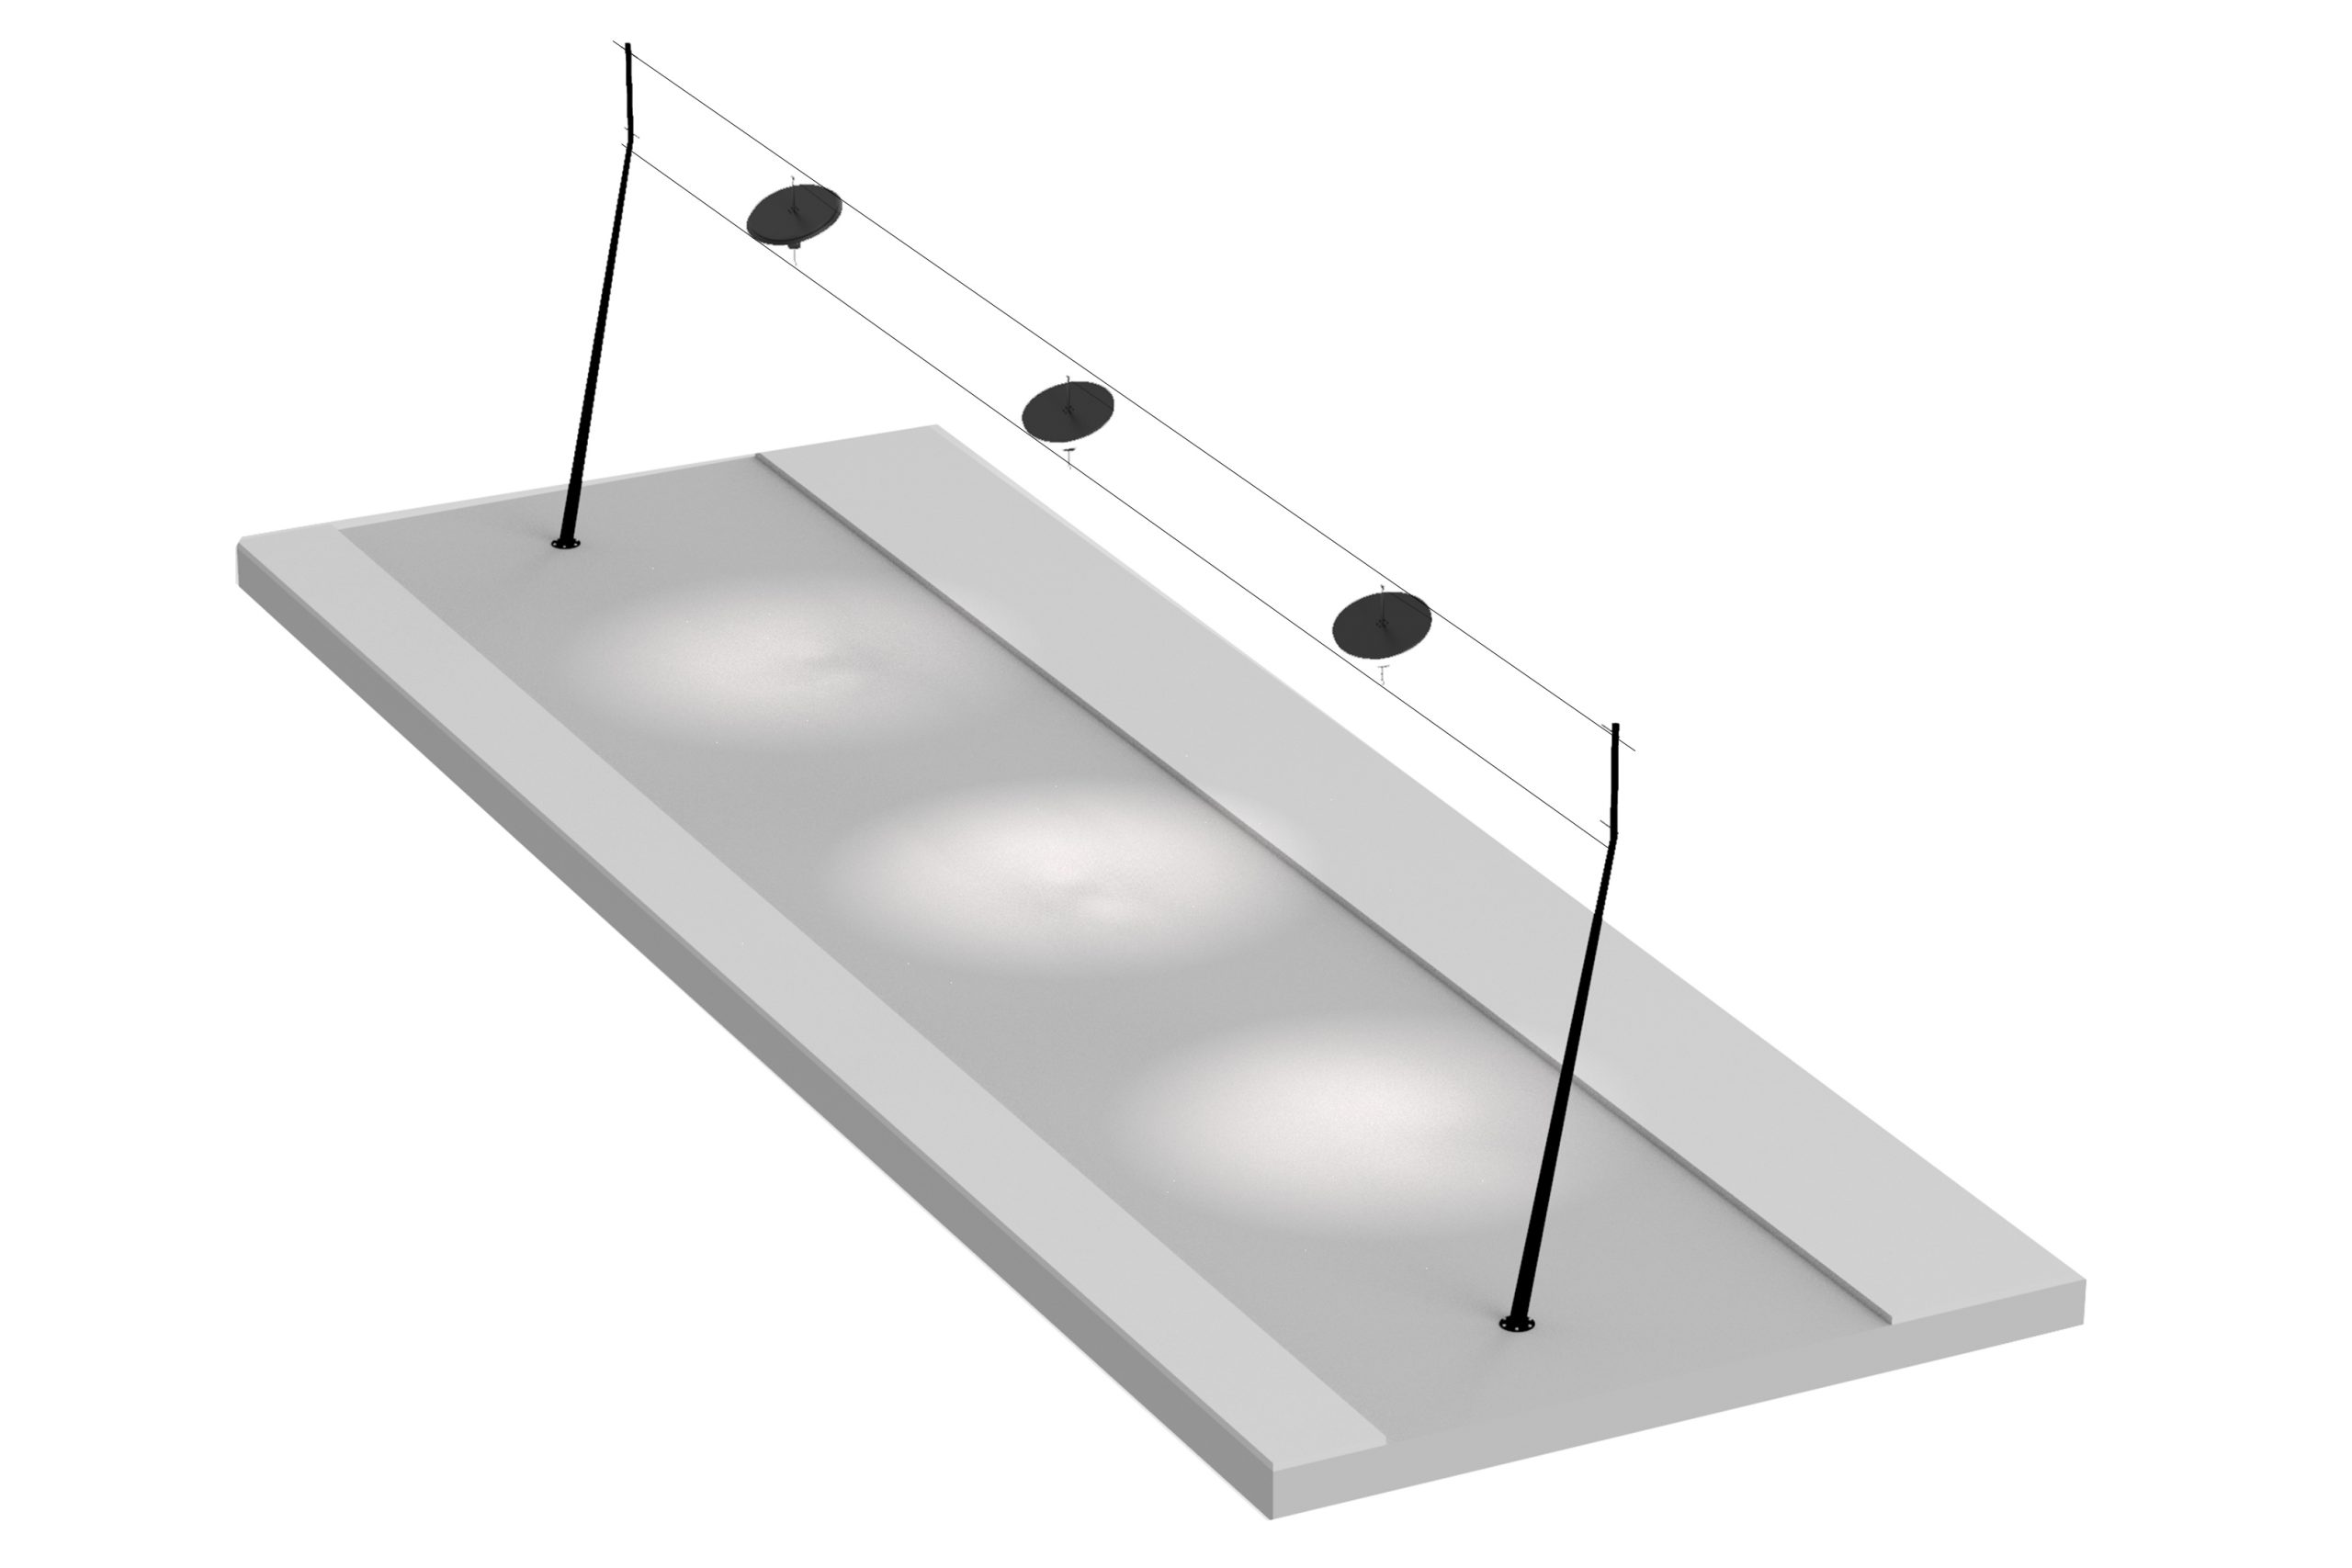 Render of a linear array of 3 sunseekers suspended between two poles